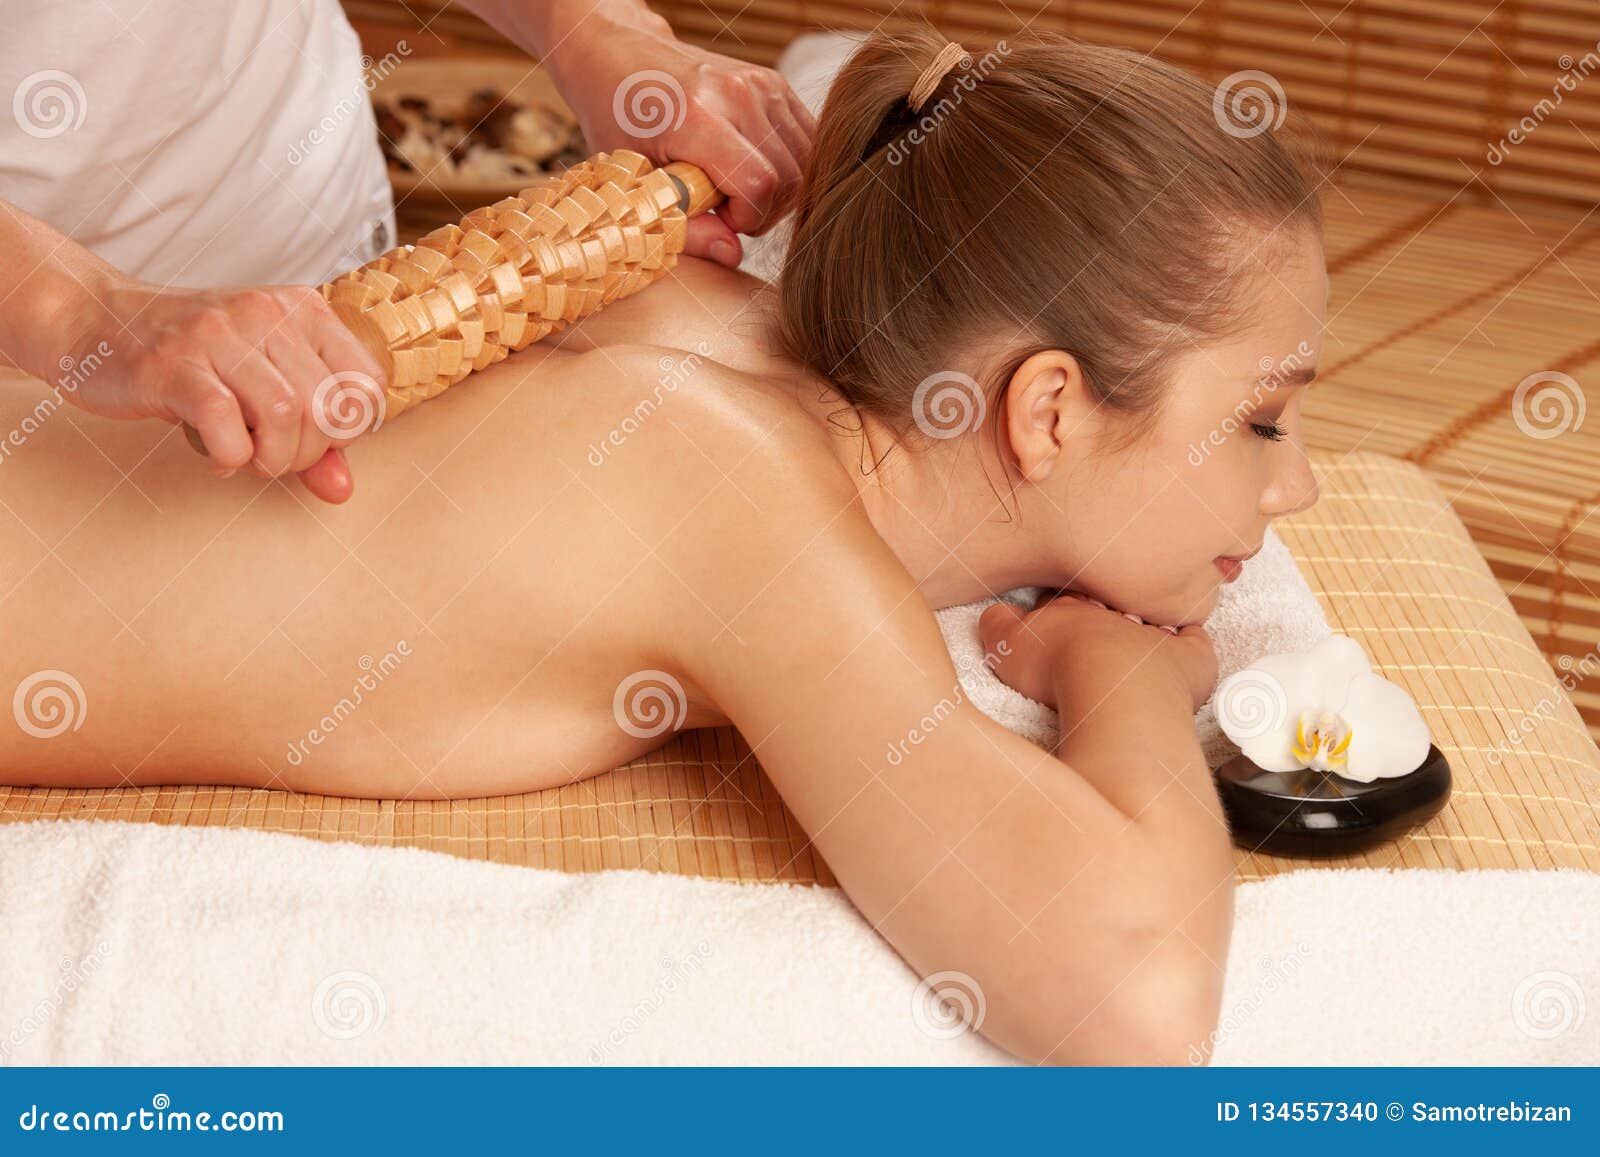 beautiful young woman having a maderotherapy massage treatment in spa salon - wellness